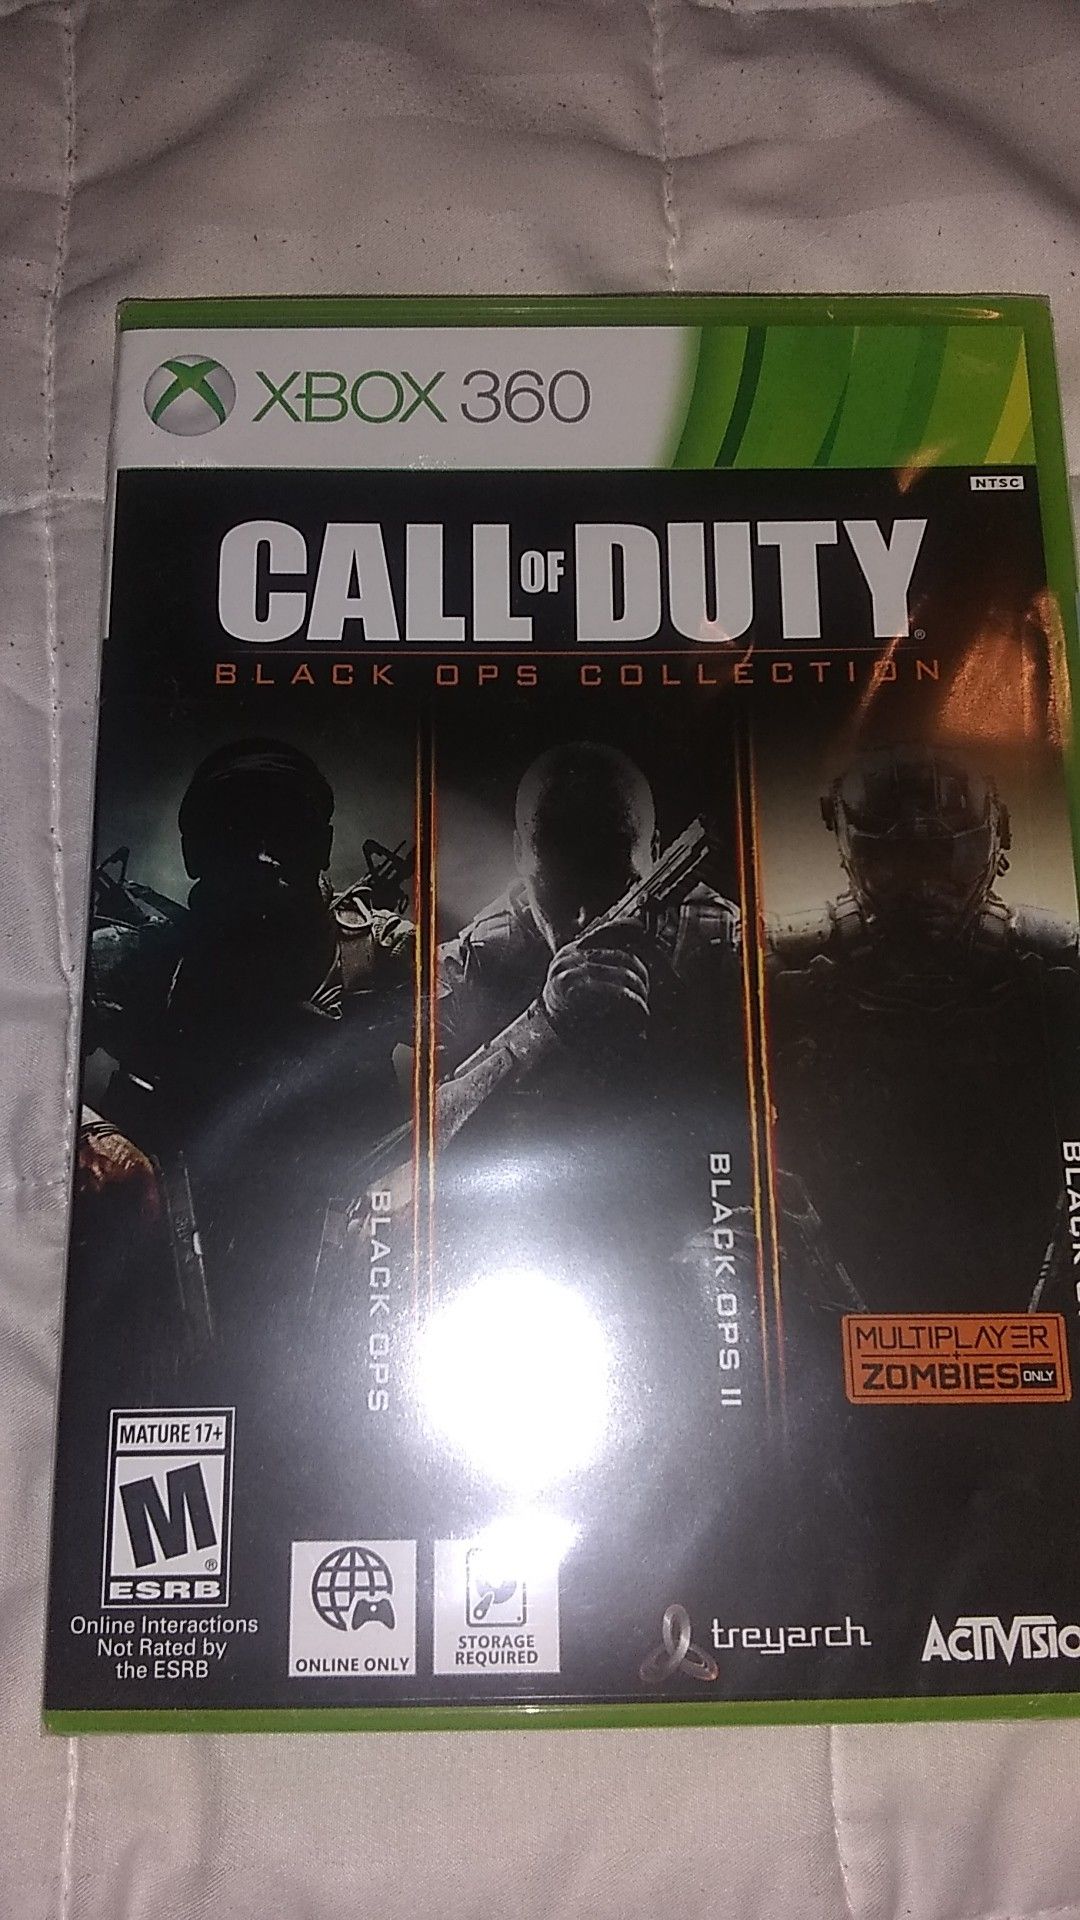 Call of Duty Black Ops Collection, Xbox 360, New